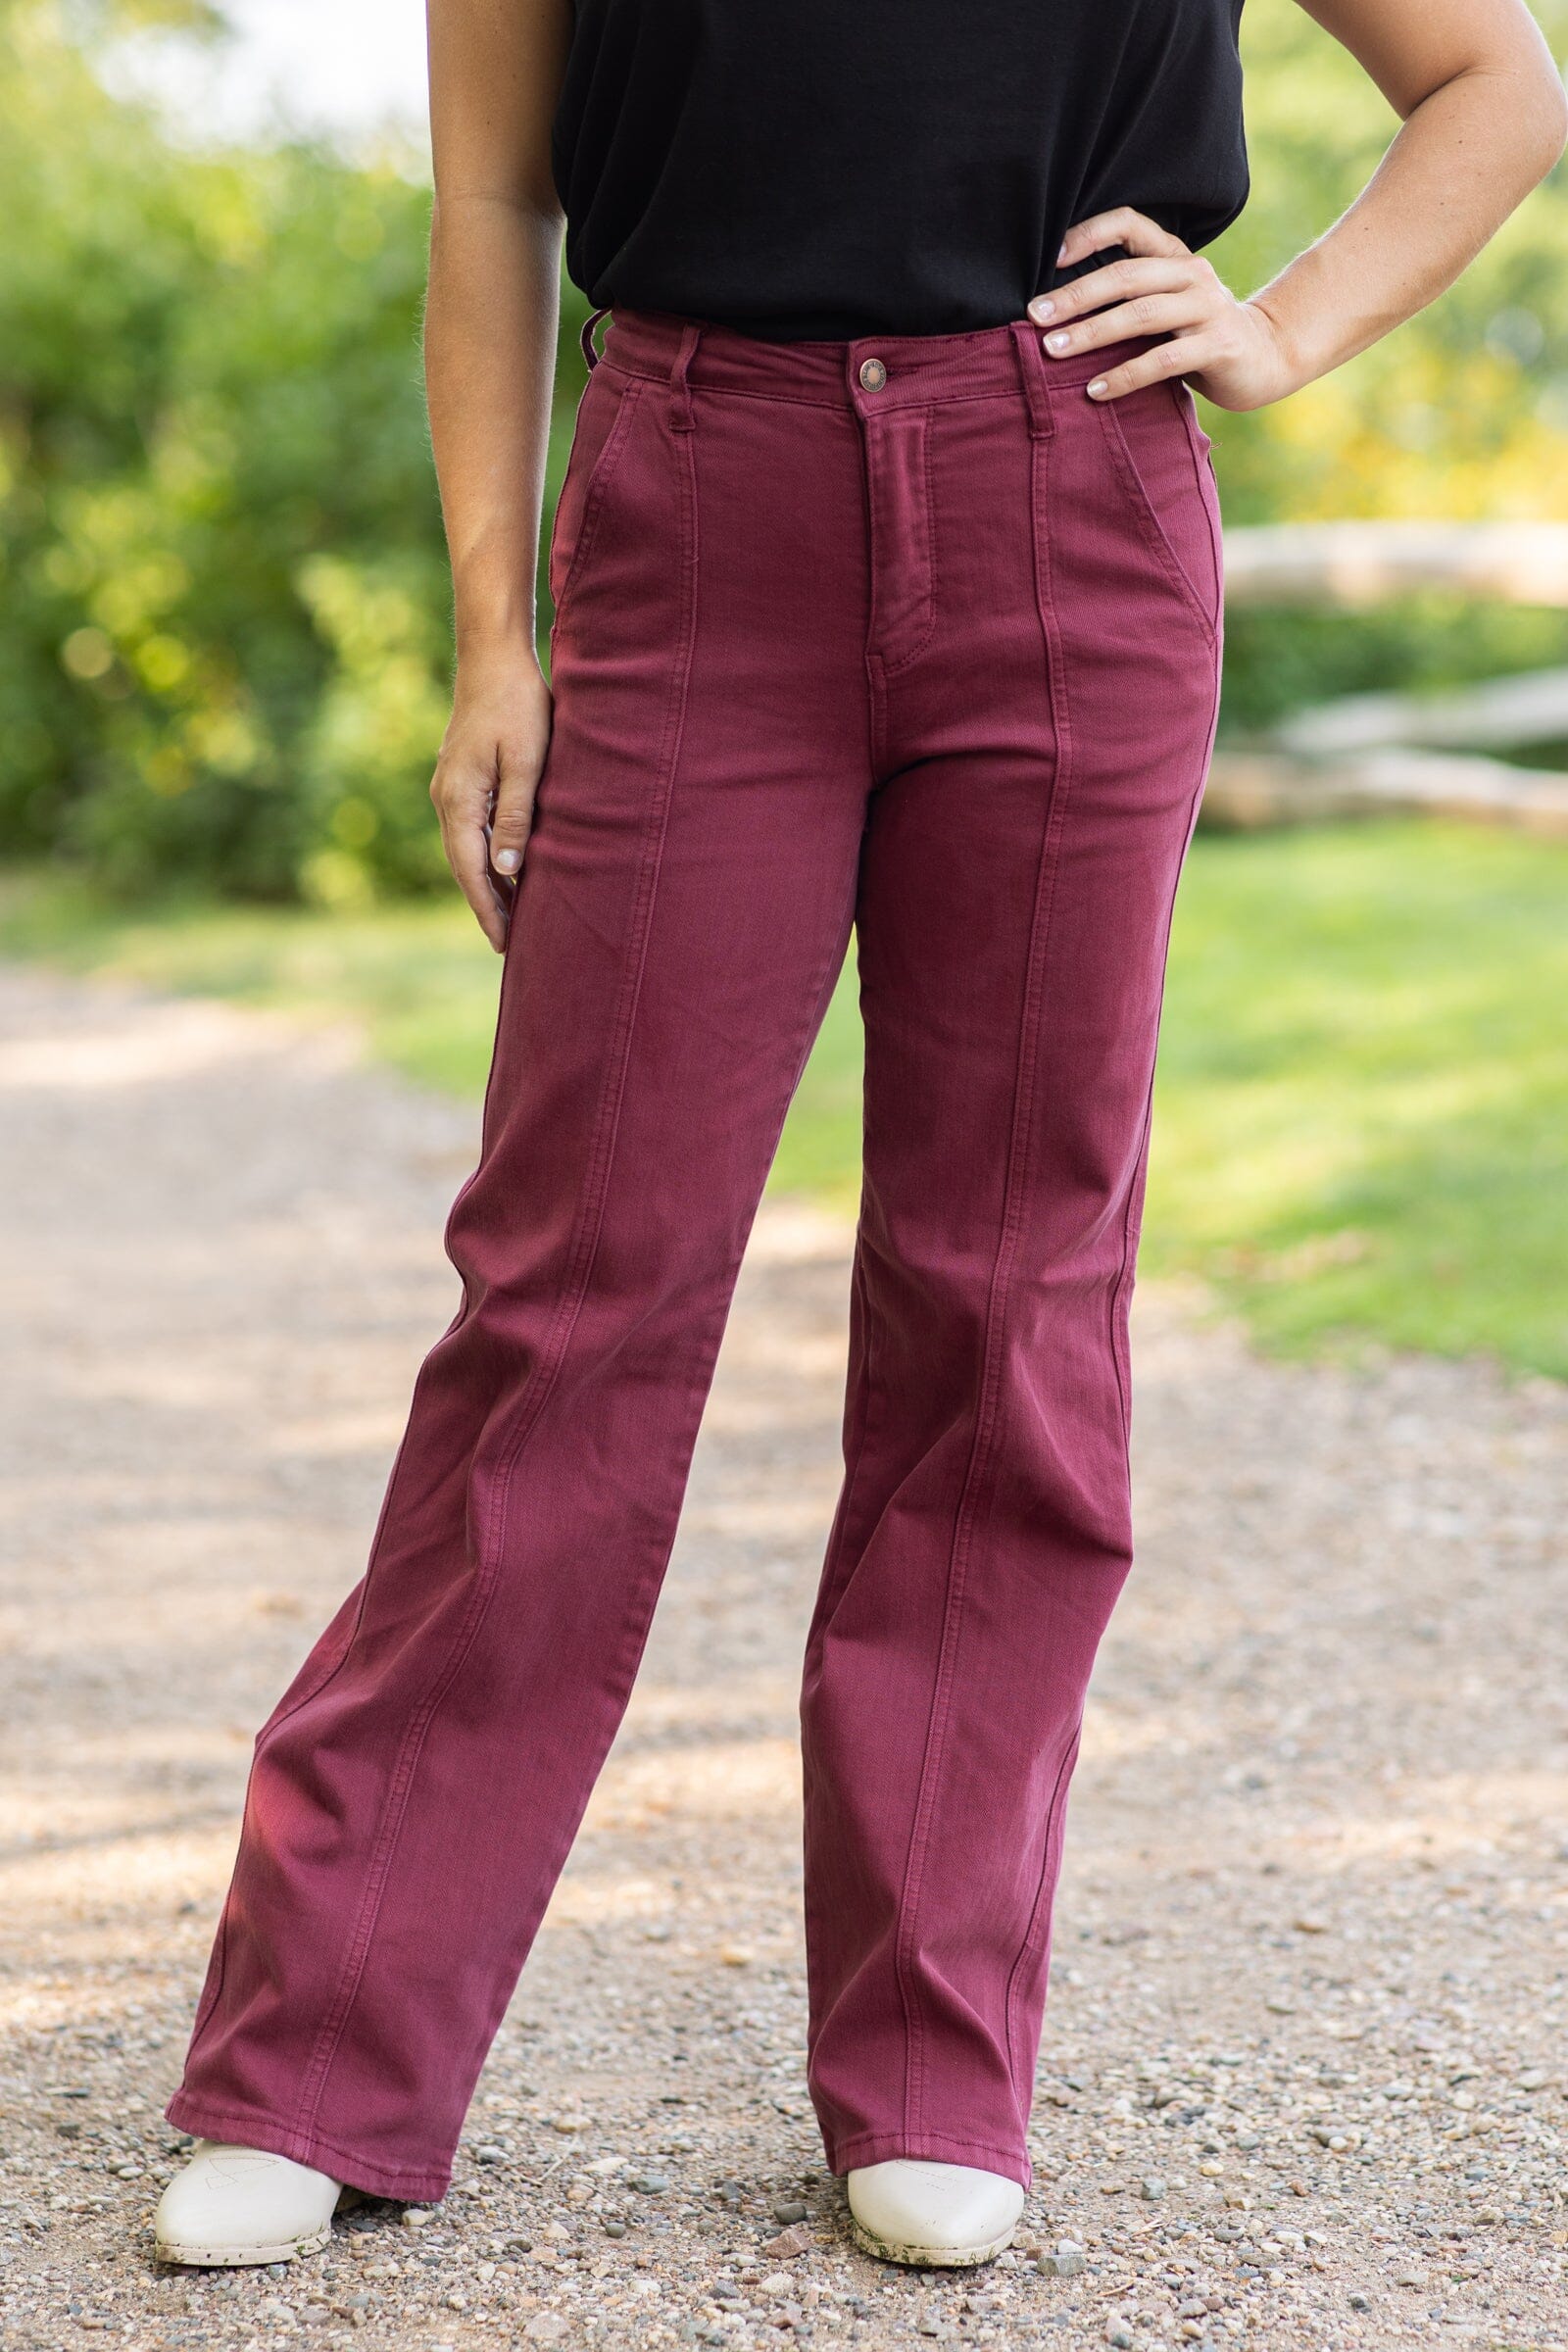 Judy Blue Wine Garment Dyed Straight Leg Jeans - Filly Flair